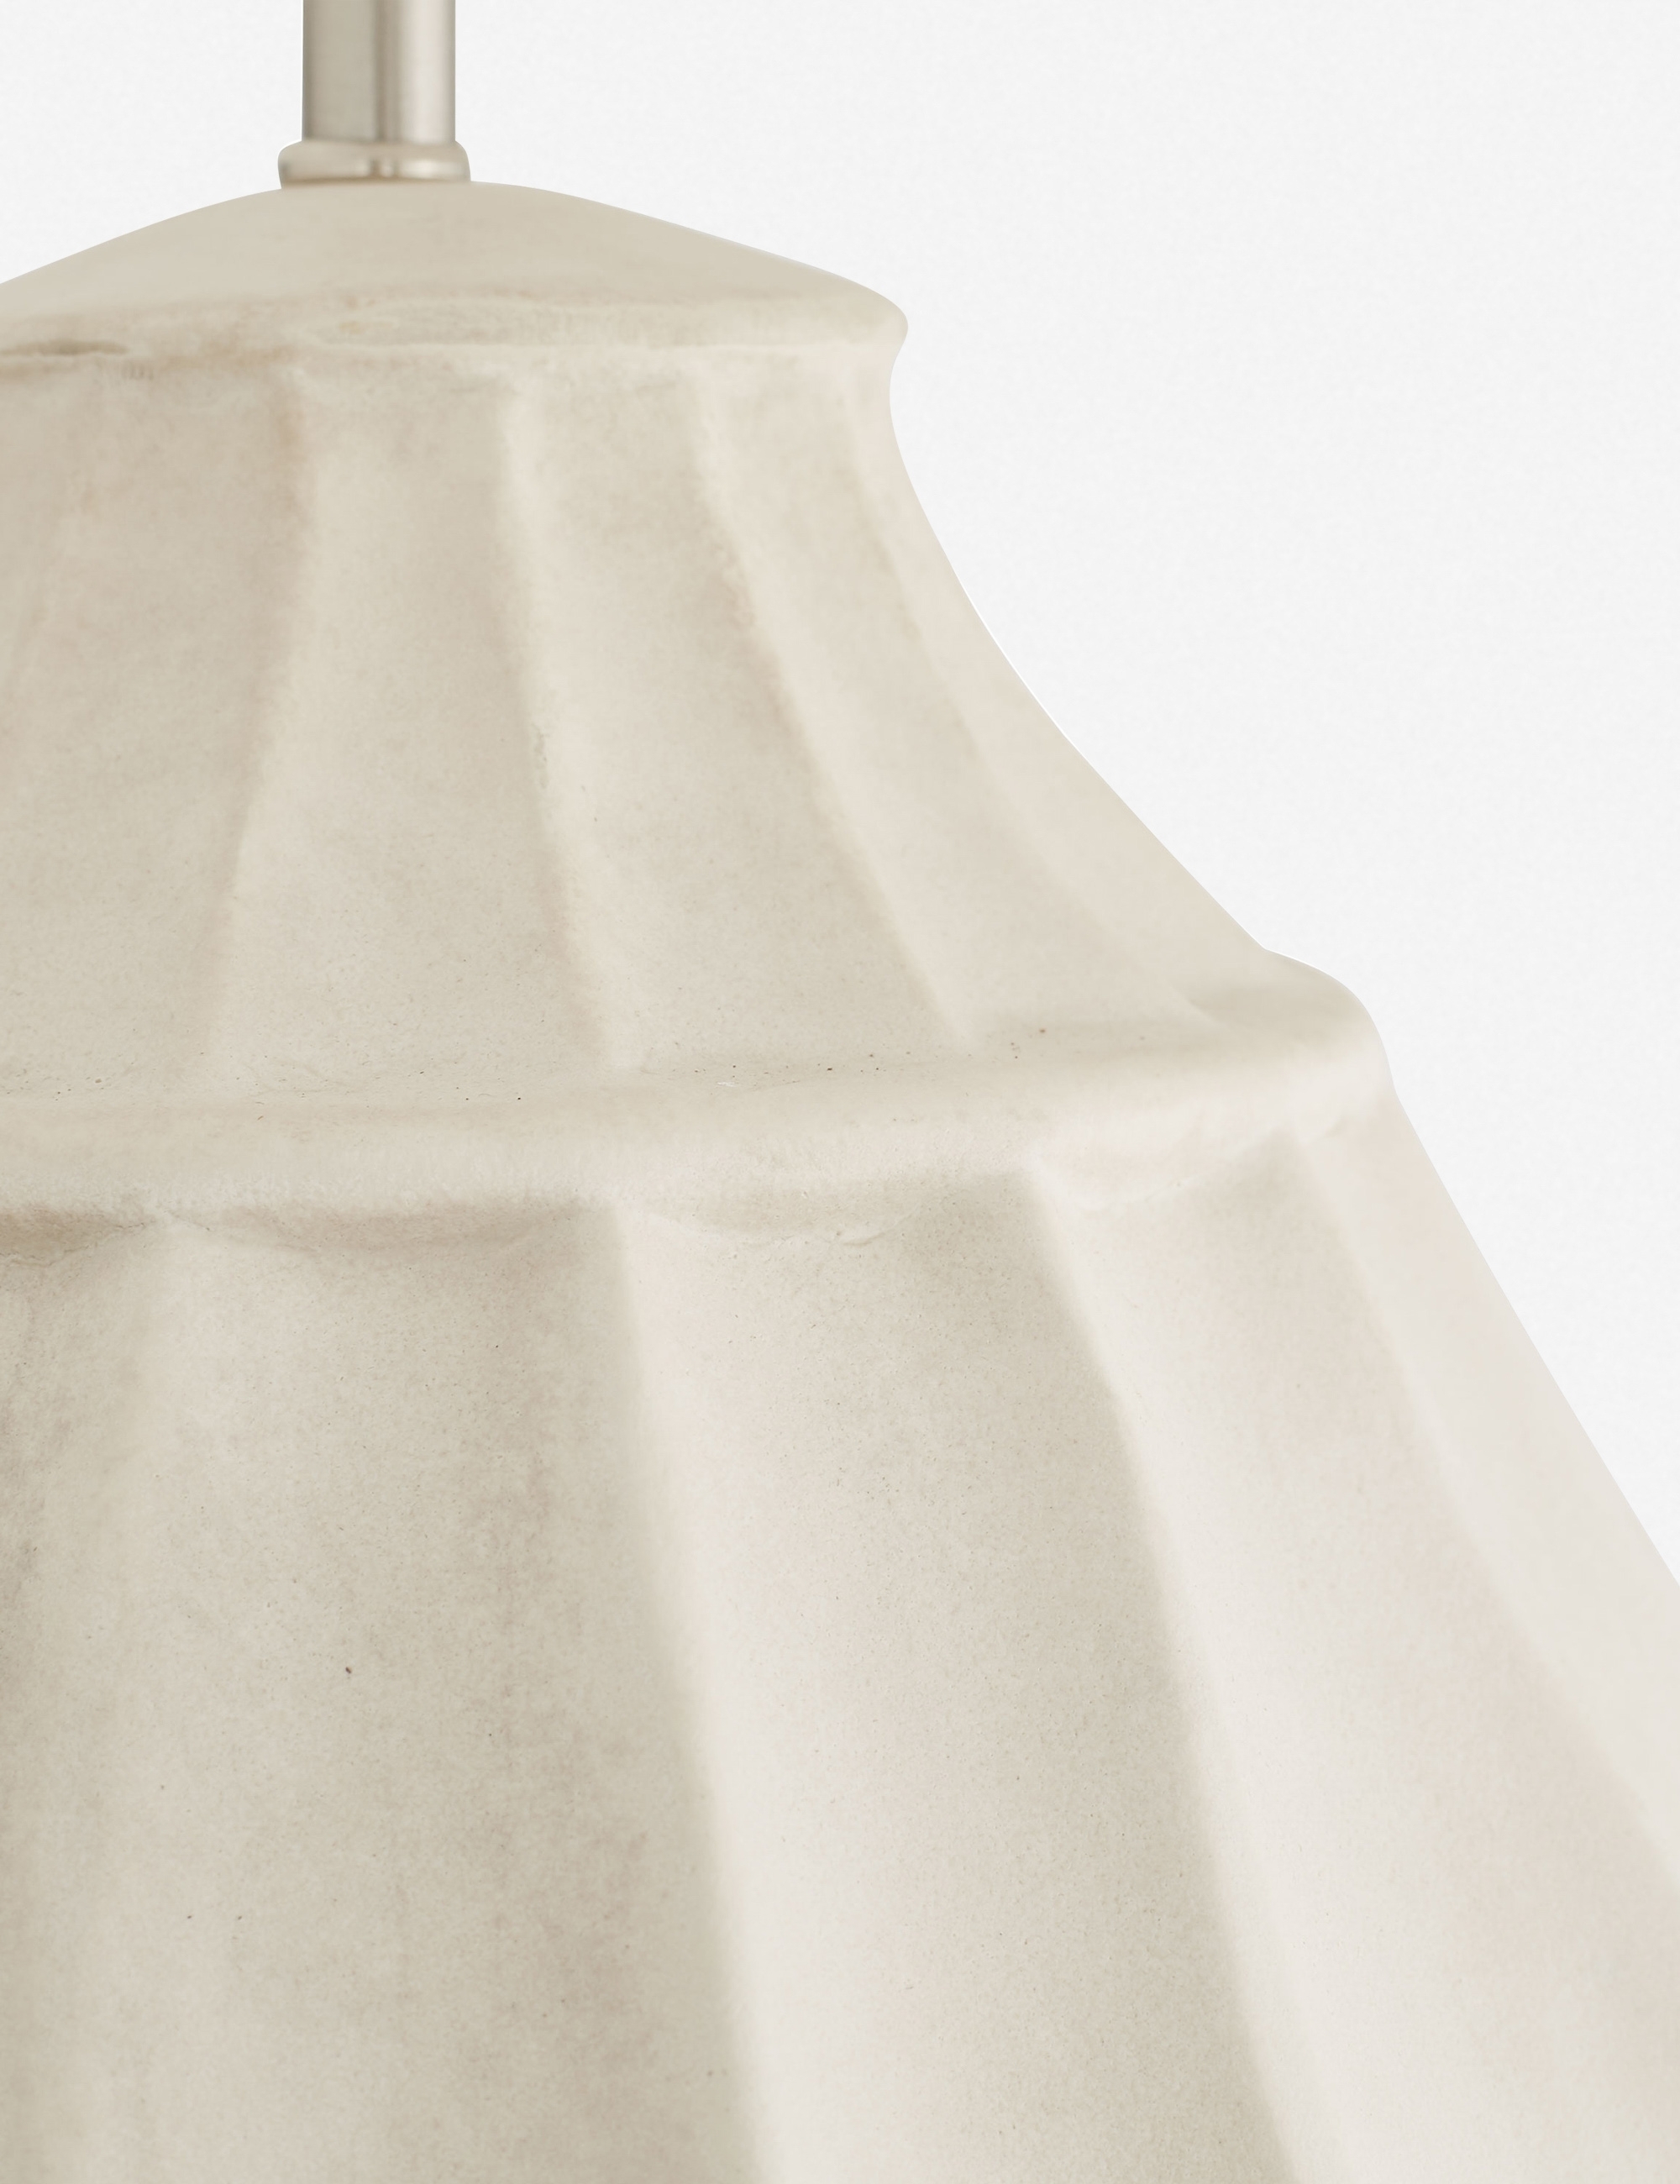 Tangier Table Lamp by Beth Webb for Arteriors - Image 1